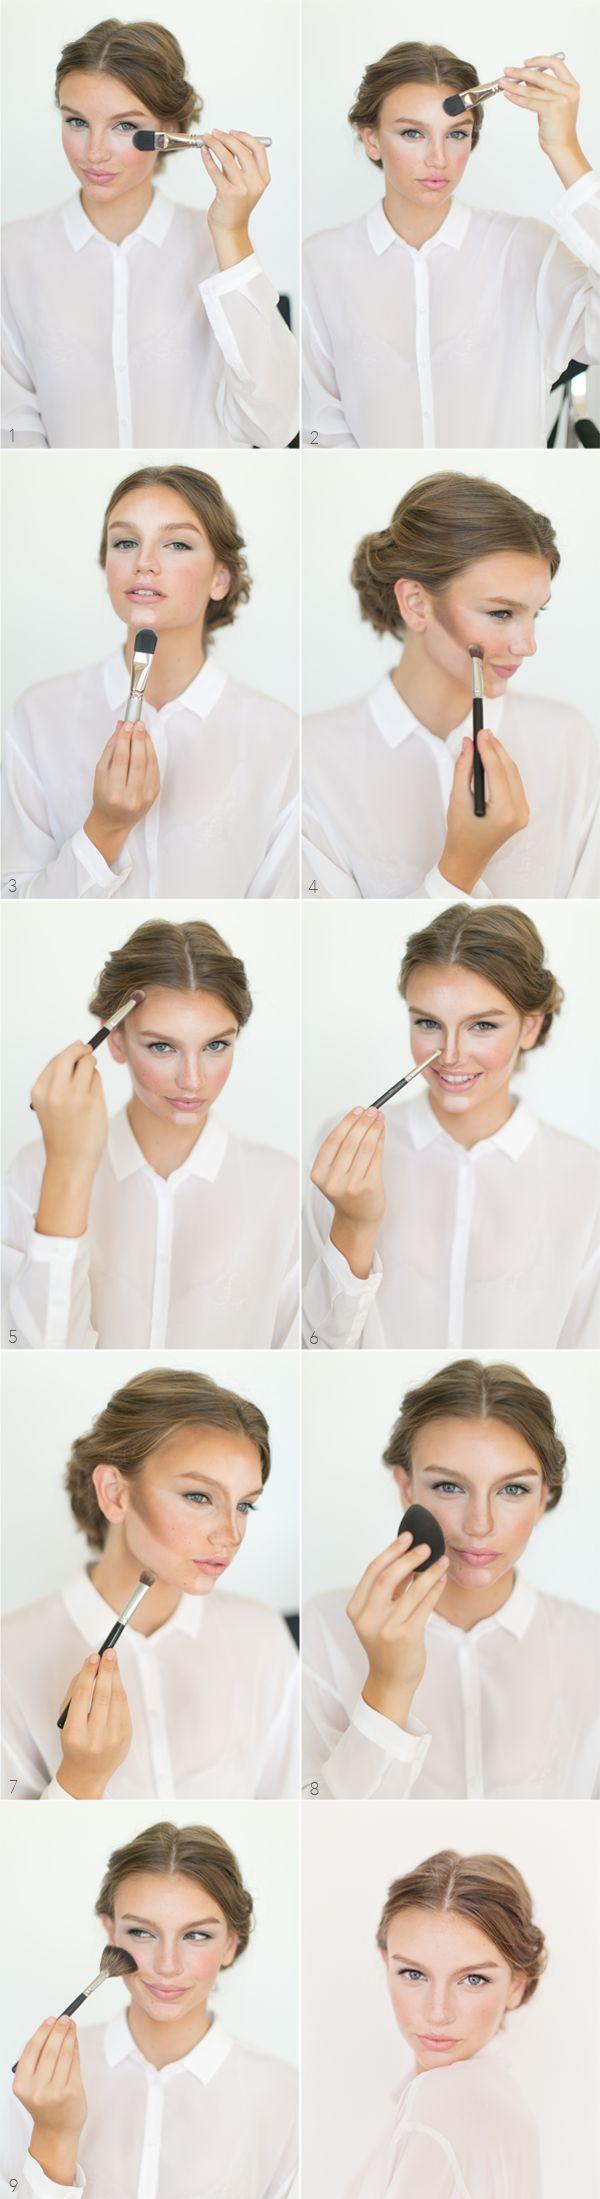 useful-makeup-tutorials-for-a-sophisticated-look.jpg